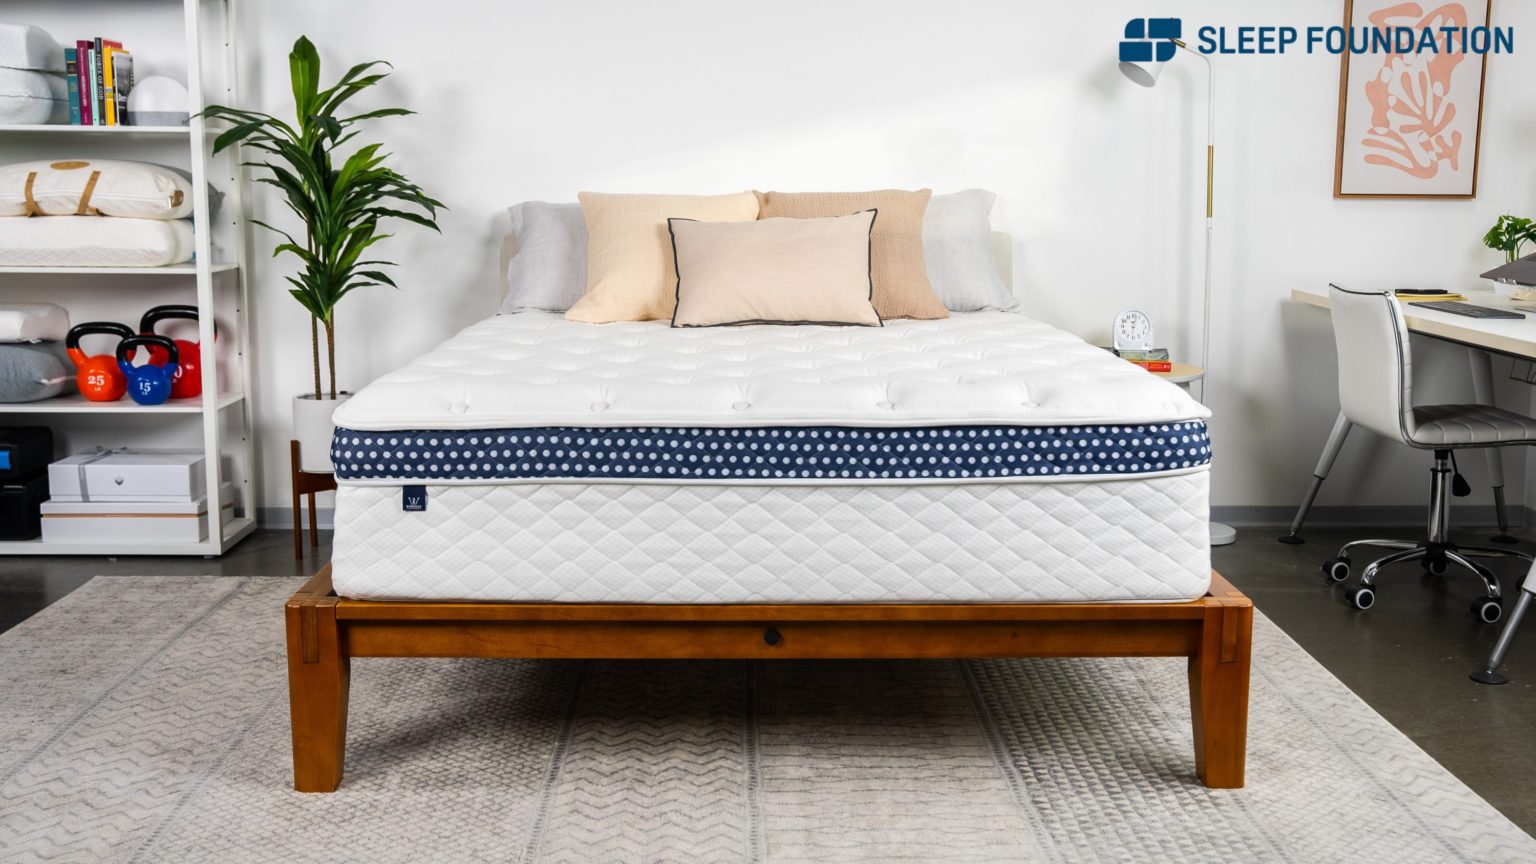 How To Choose The Right Split Cal King Mattress